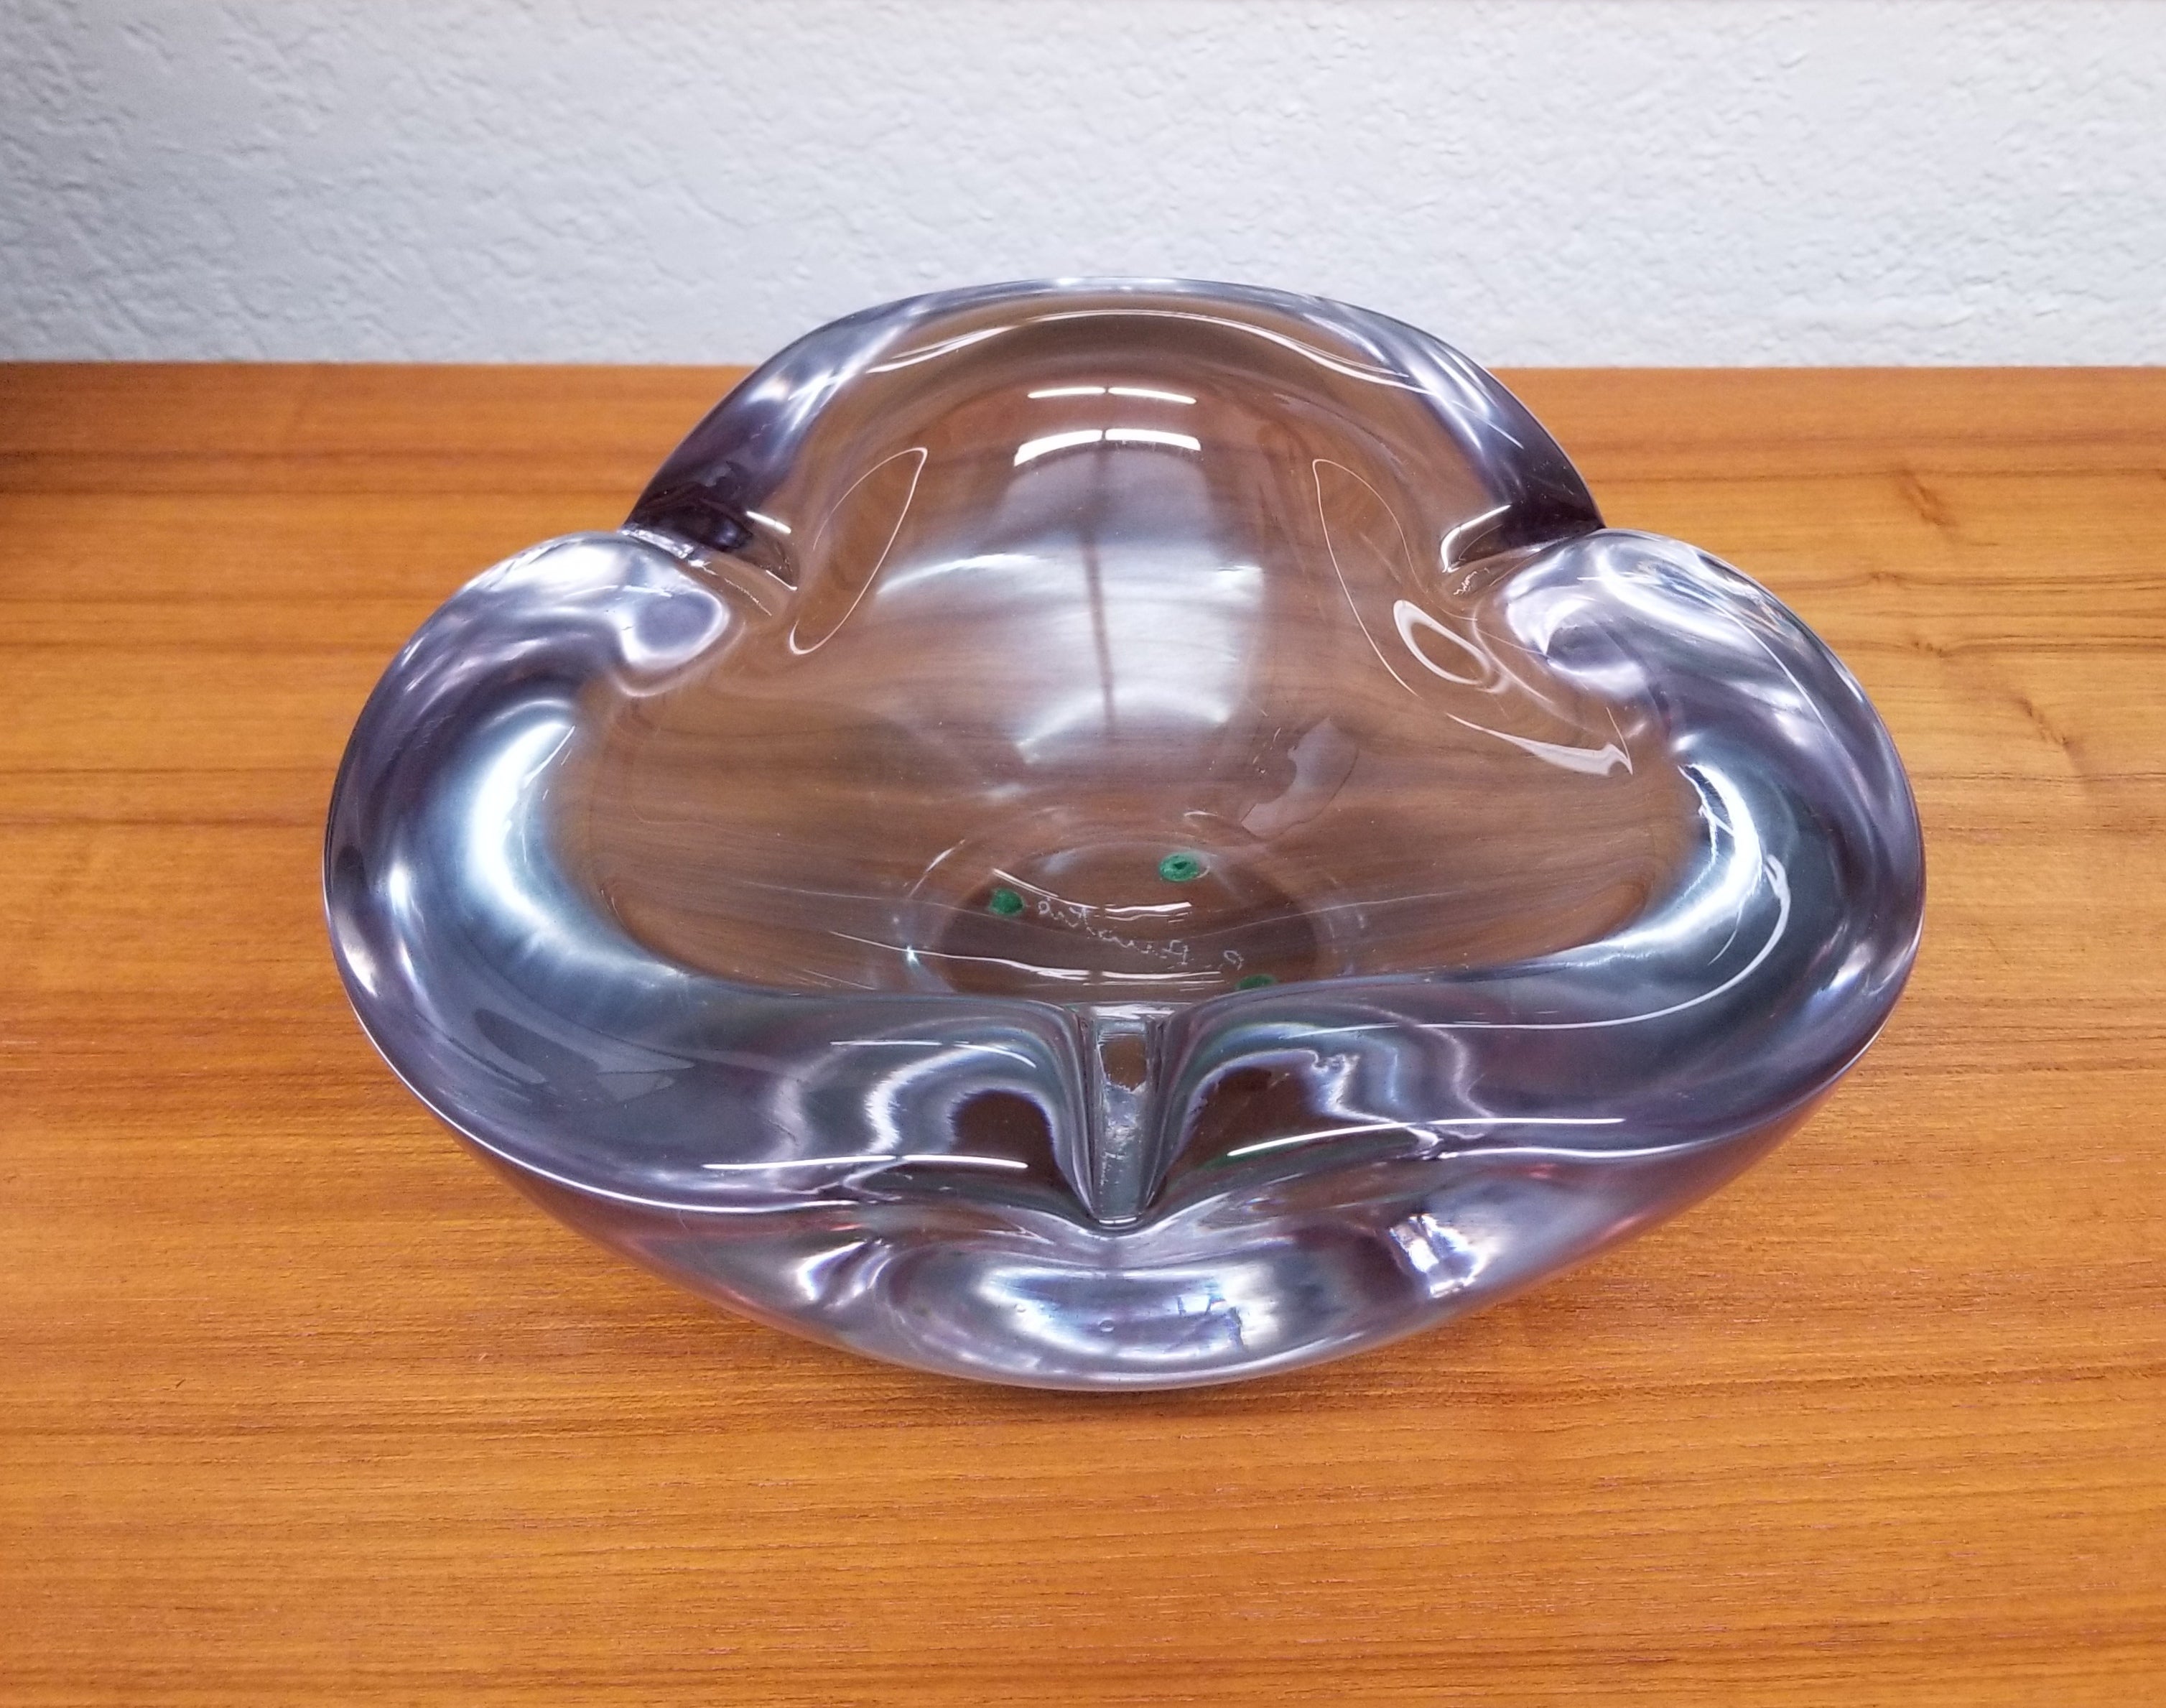 Incredibly gorgeous purple Italian art glass ashtray or catchall bowl, hand-made by Renato Anatrà in Murano, Italy. A hand-crafted statement piece with impressive weight and an amazing amethyst purple hue. Beautiful in its simplicity, striking jewel